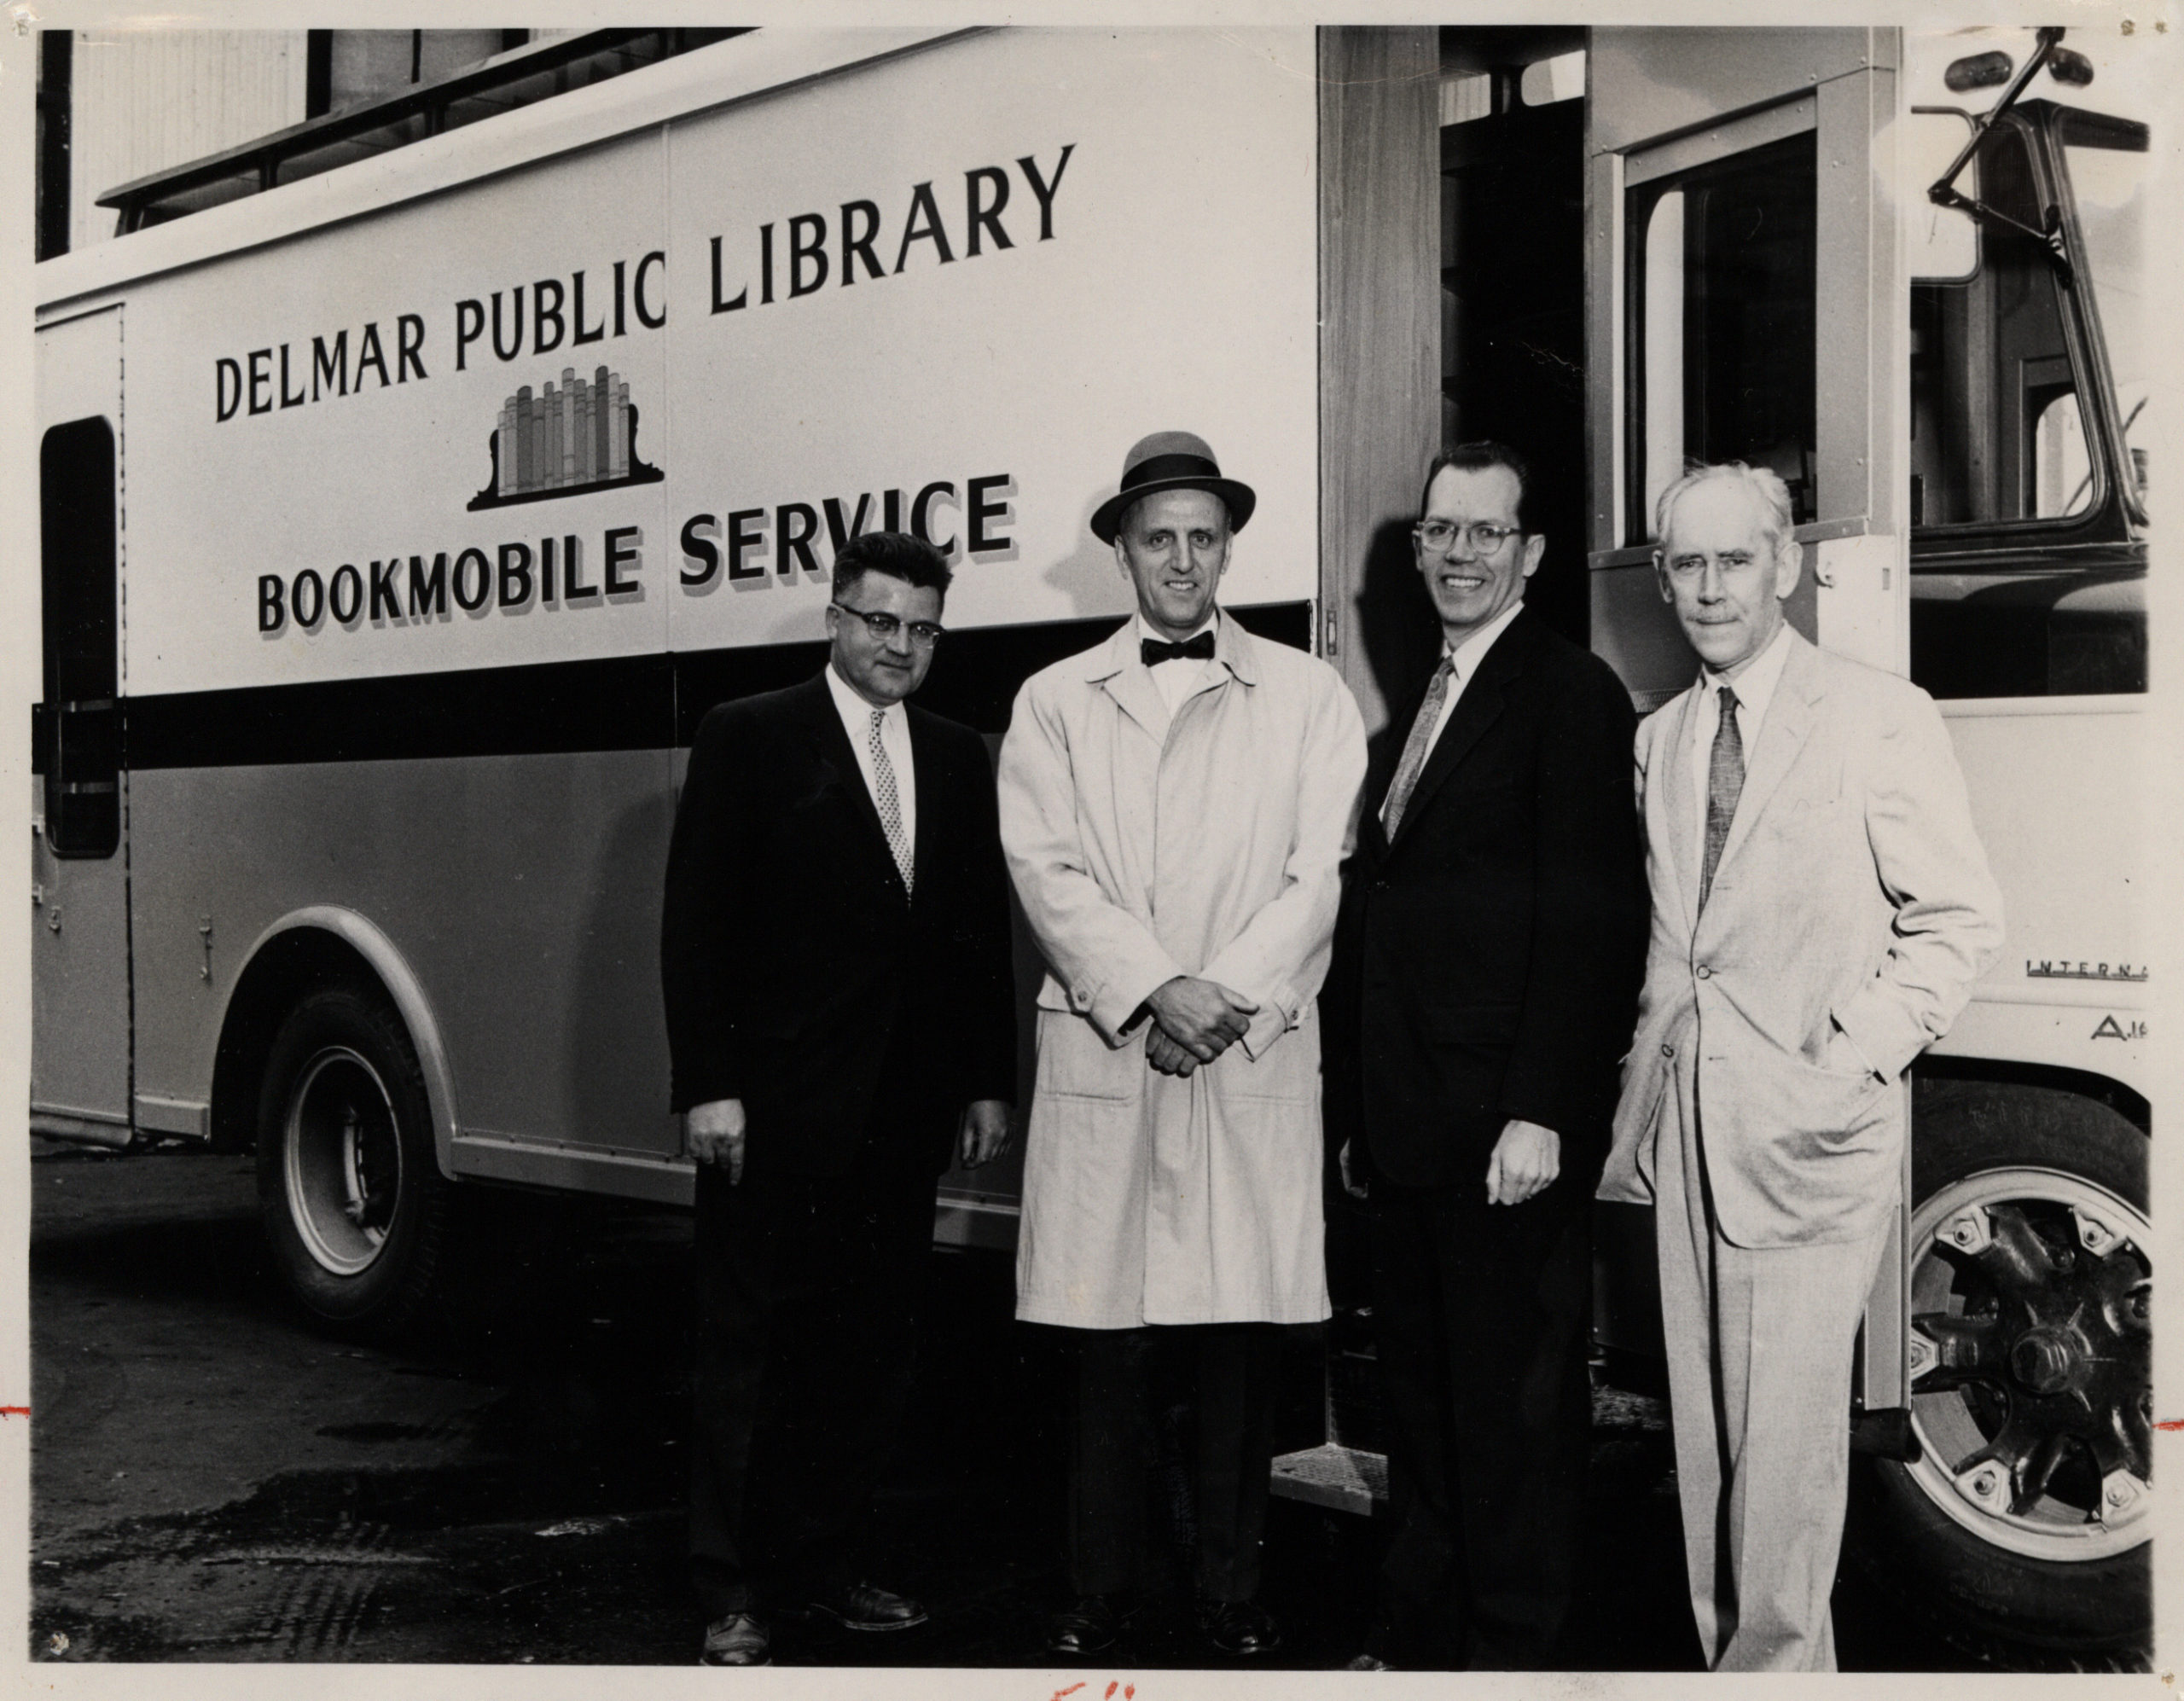 The Bookmobile Goes to Moscow: on the Finn Lines pier in Brooklyn with l. to. r. bookmobile builder Thomas F. Moroney, library board president Theodore Wenzl, John Mackenzie Cory of the American Library Association, and Thomas J. McLaughlin, head of the Combined Book Exhibit delegation (Publisher’s Weekly 5.25.59, photo by Robert Berenson)